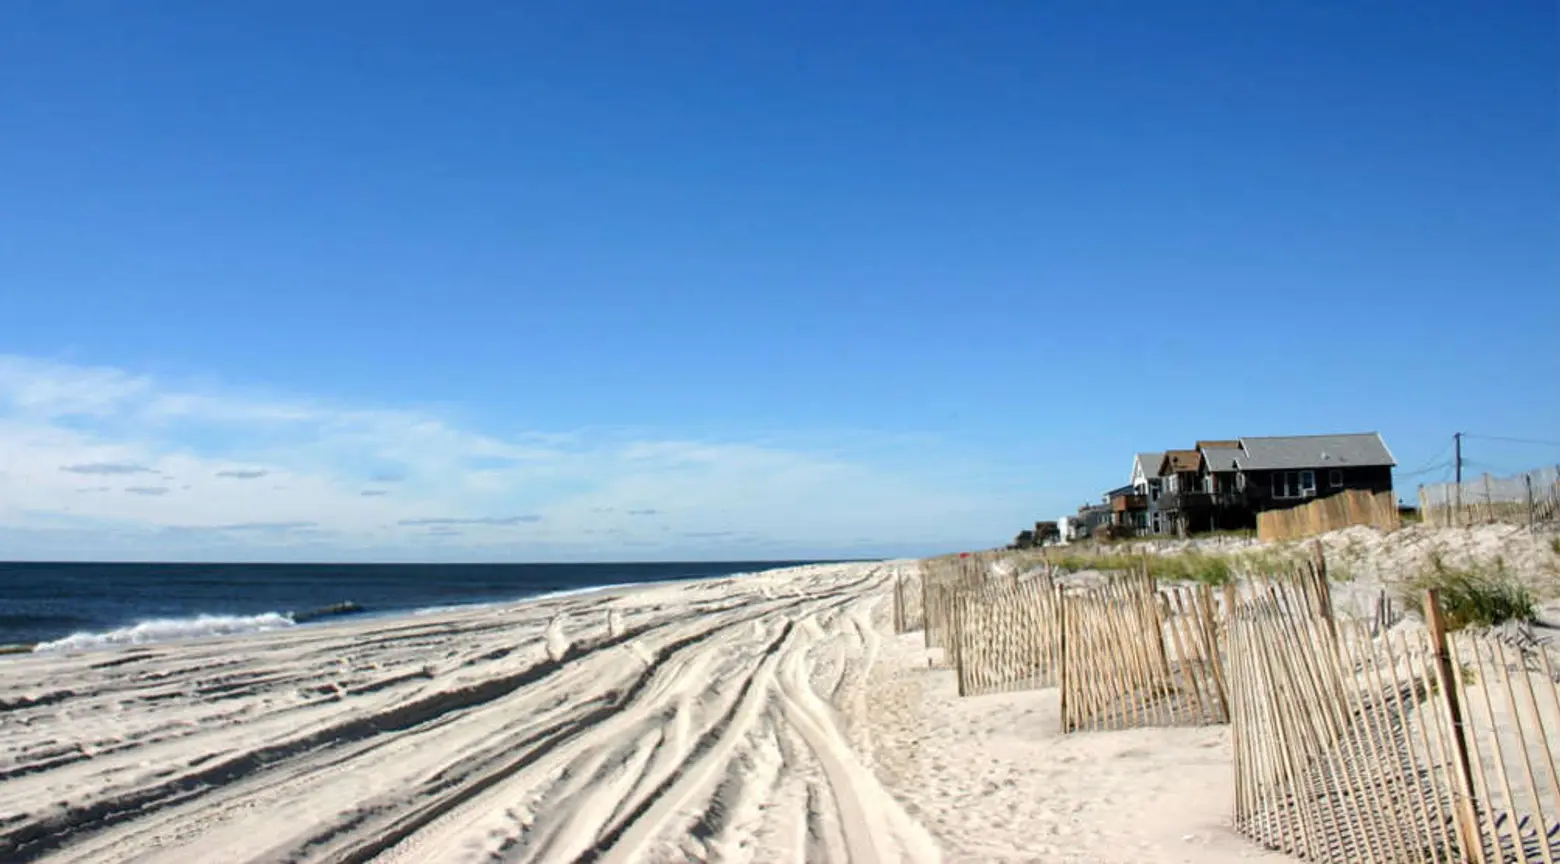 Fire Island: Culture, Sand Dunes and Real Estate